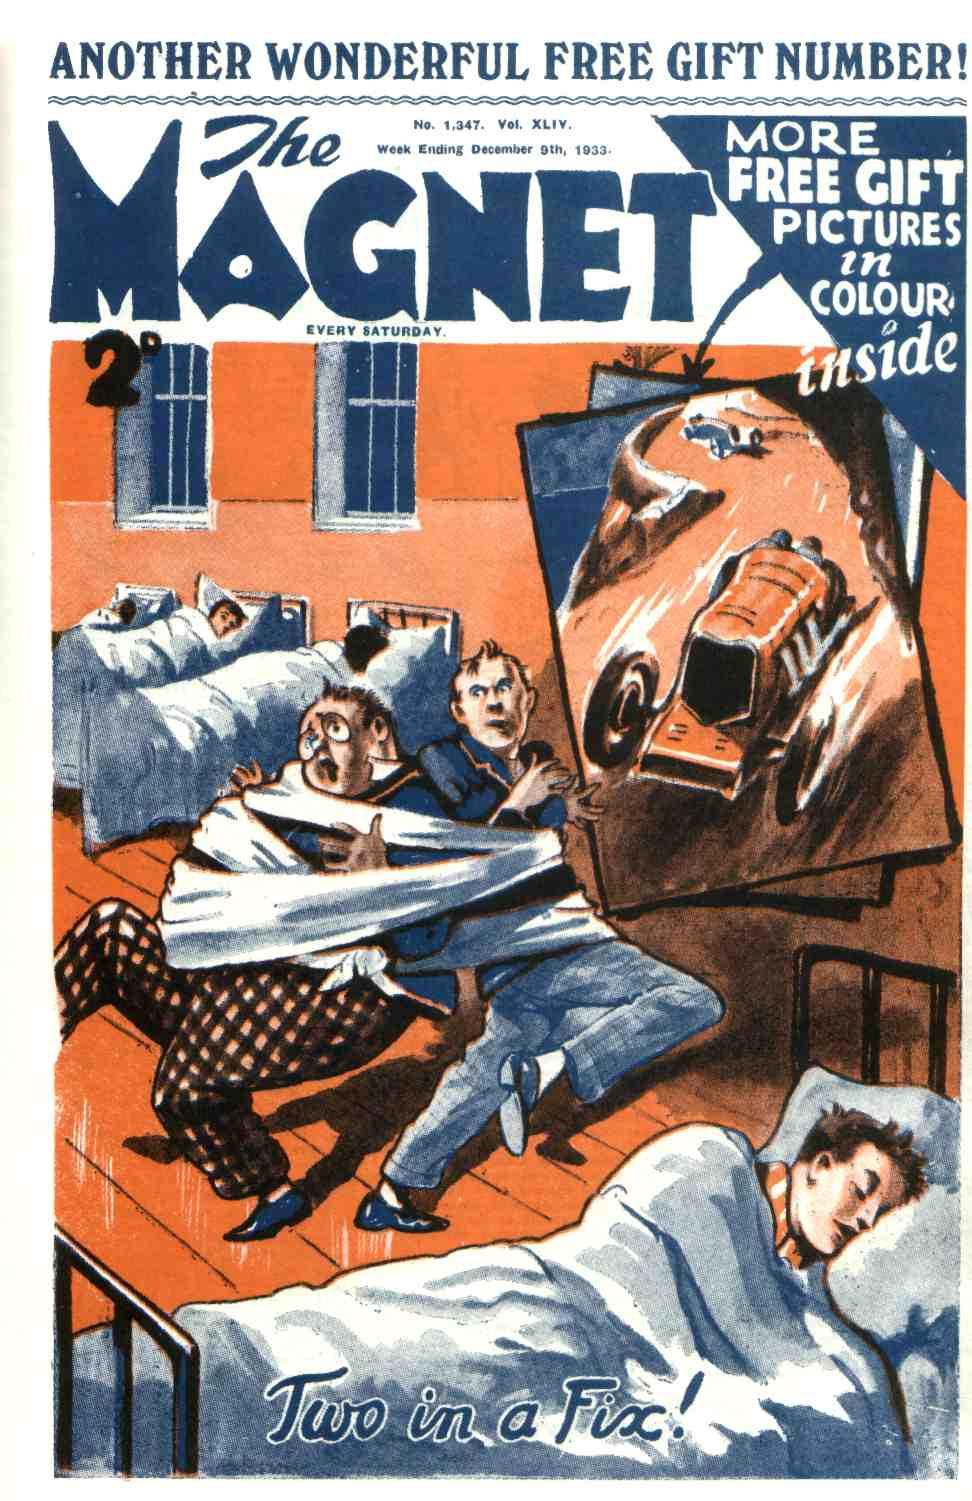 Book Cover For The Magnet 1347 - The Reformer of the Remove!